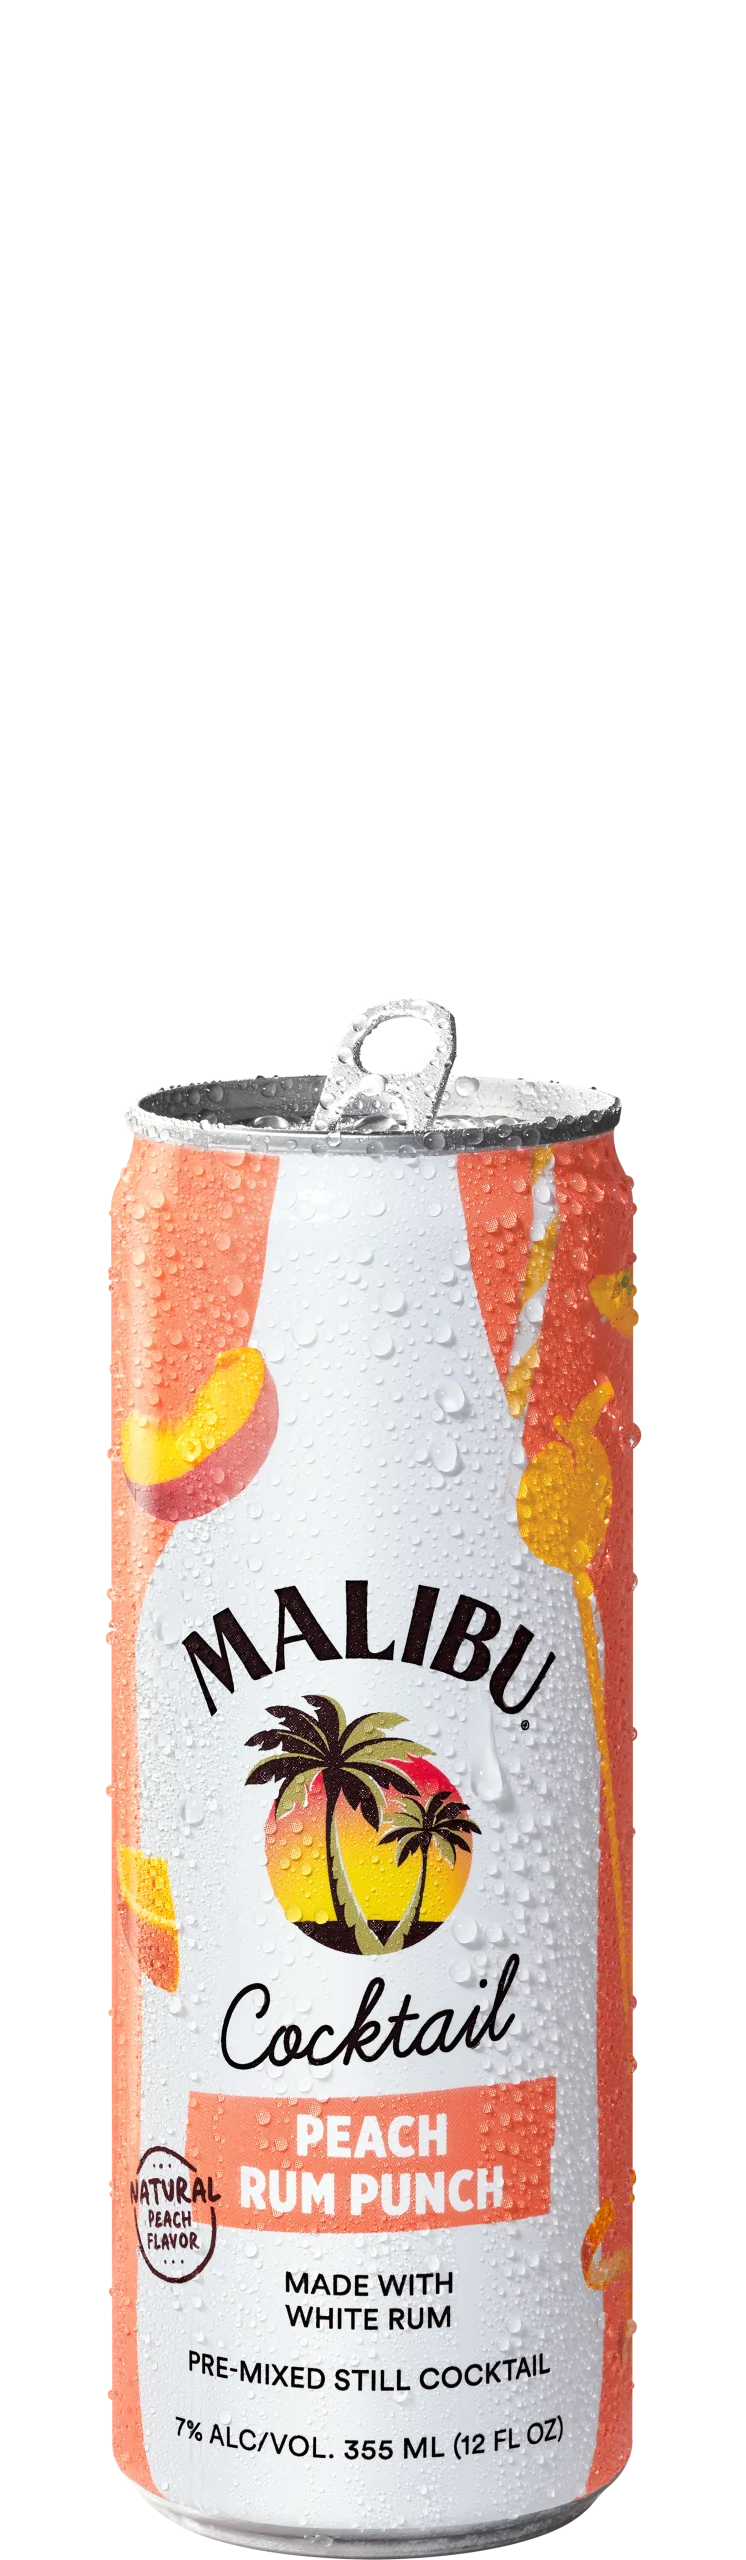 Malibu RTD cocktail can with peach rum punch